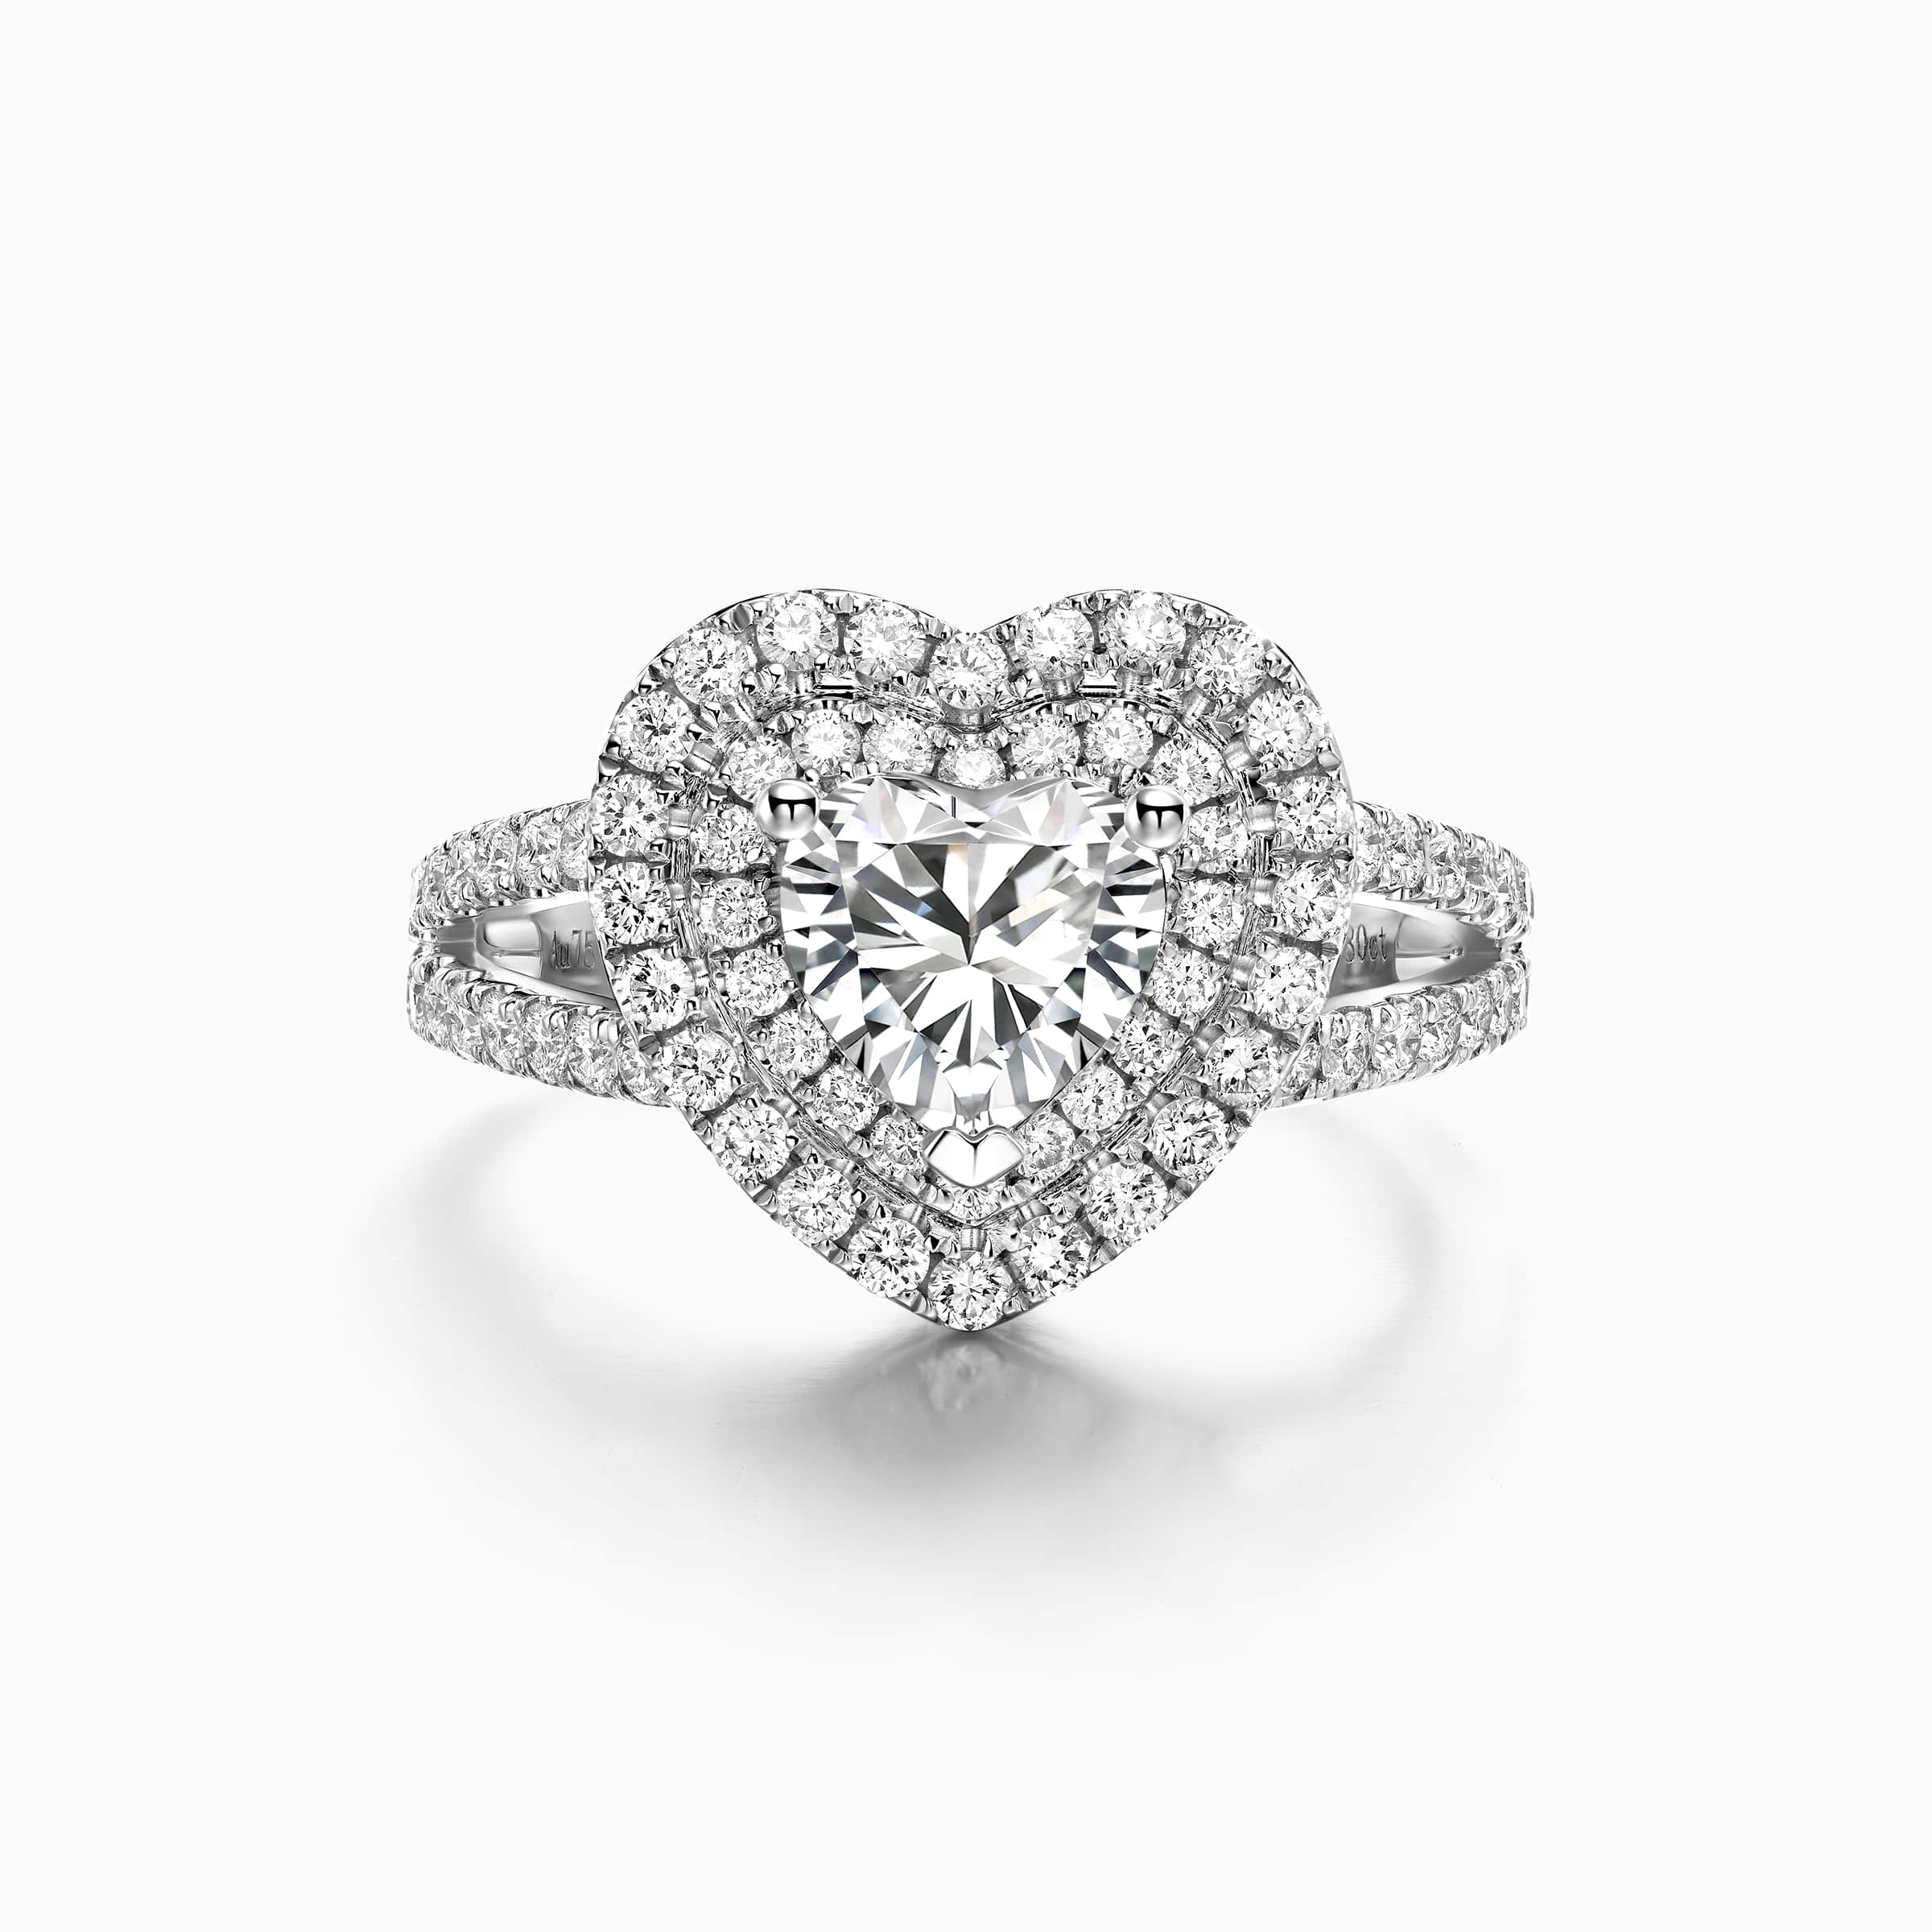 Darry Ring double halo heart promise ring in white gold